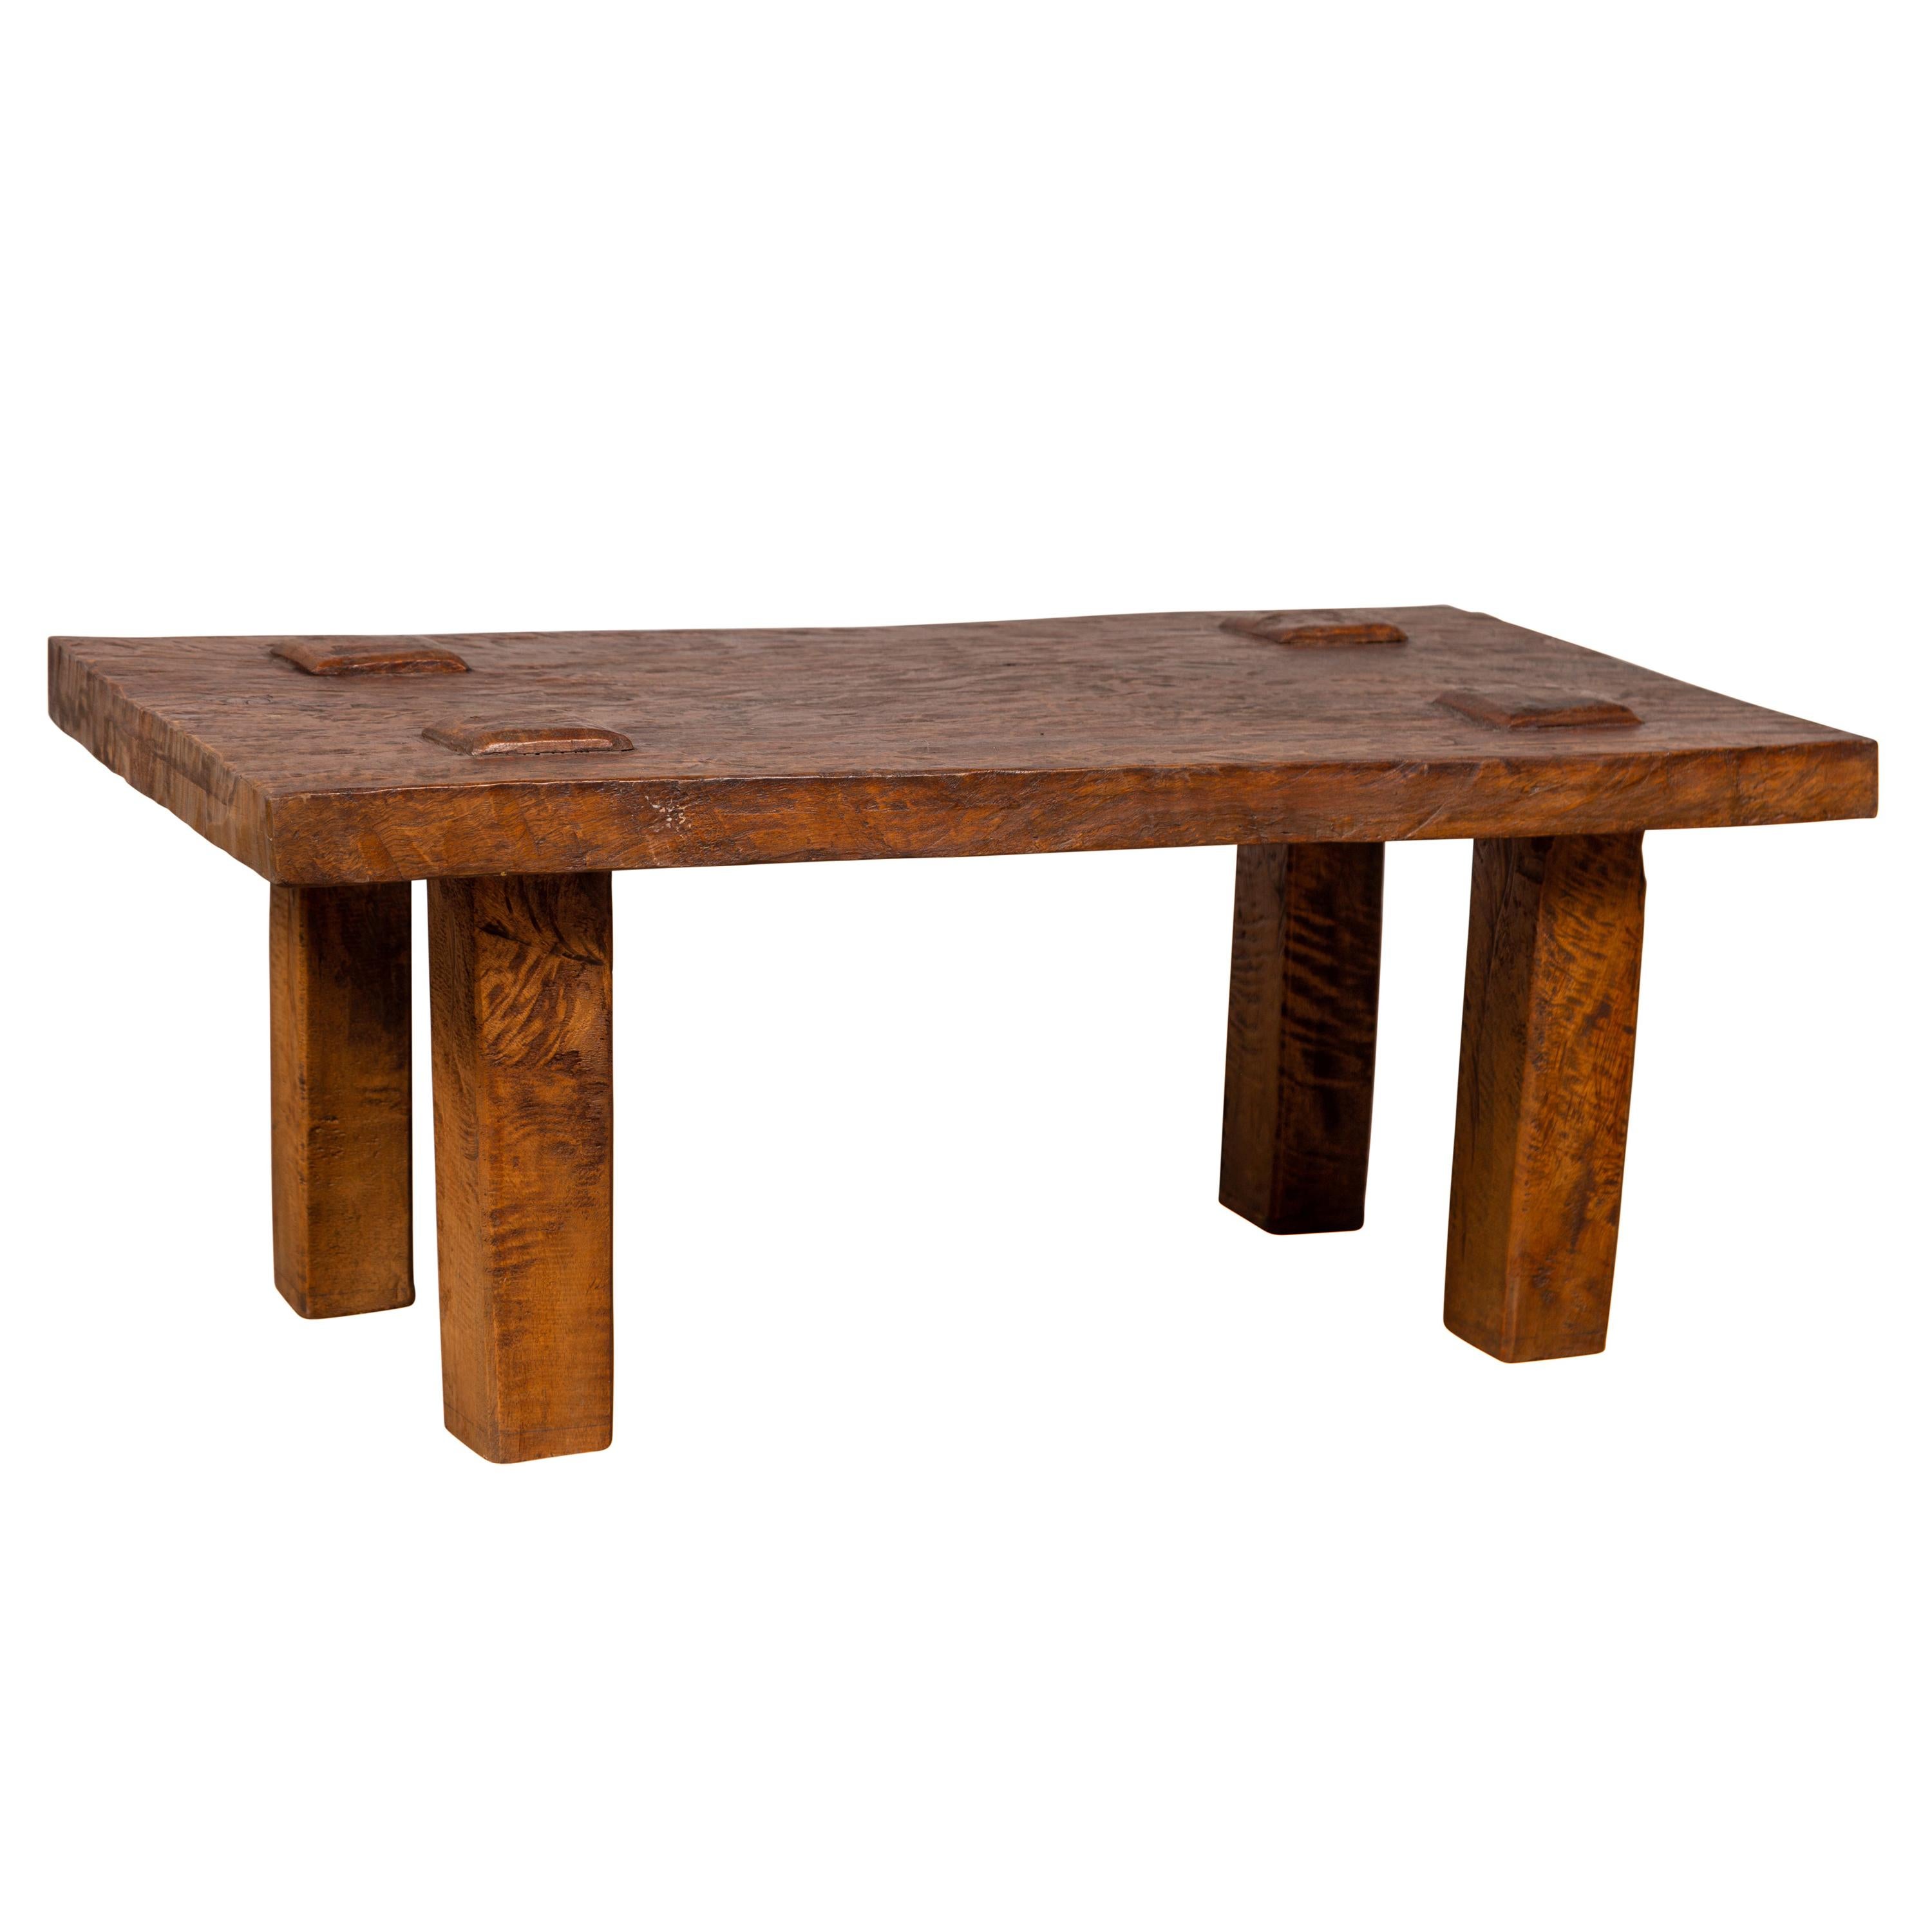 Vintage Indonesian Rustic Wooden Coffee Table with Square Legs and Raised Joints